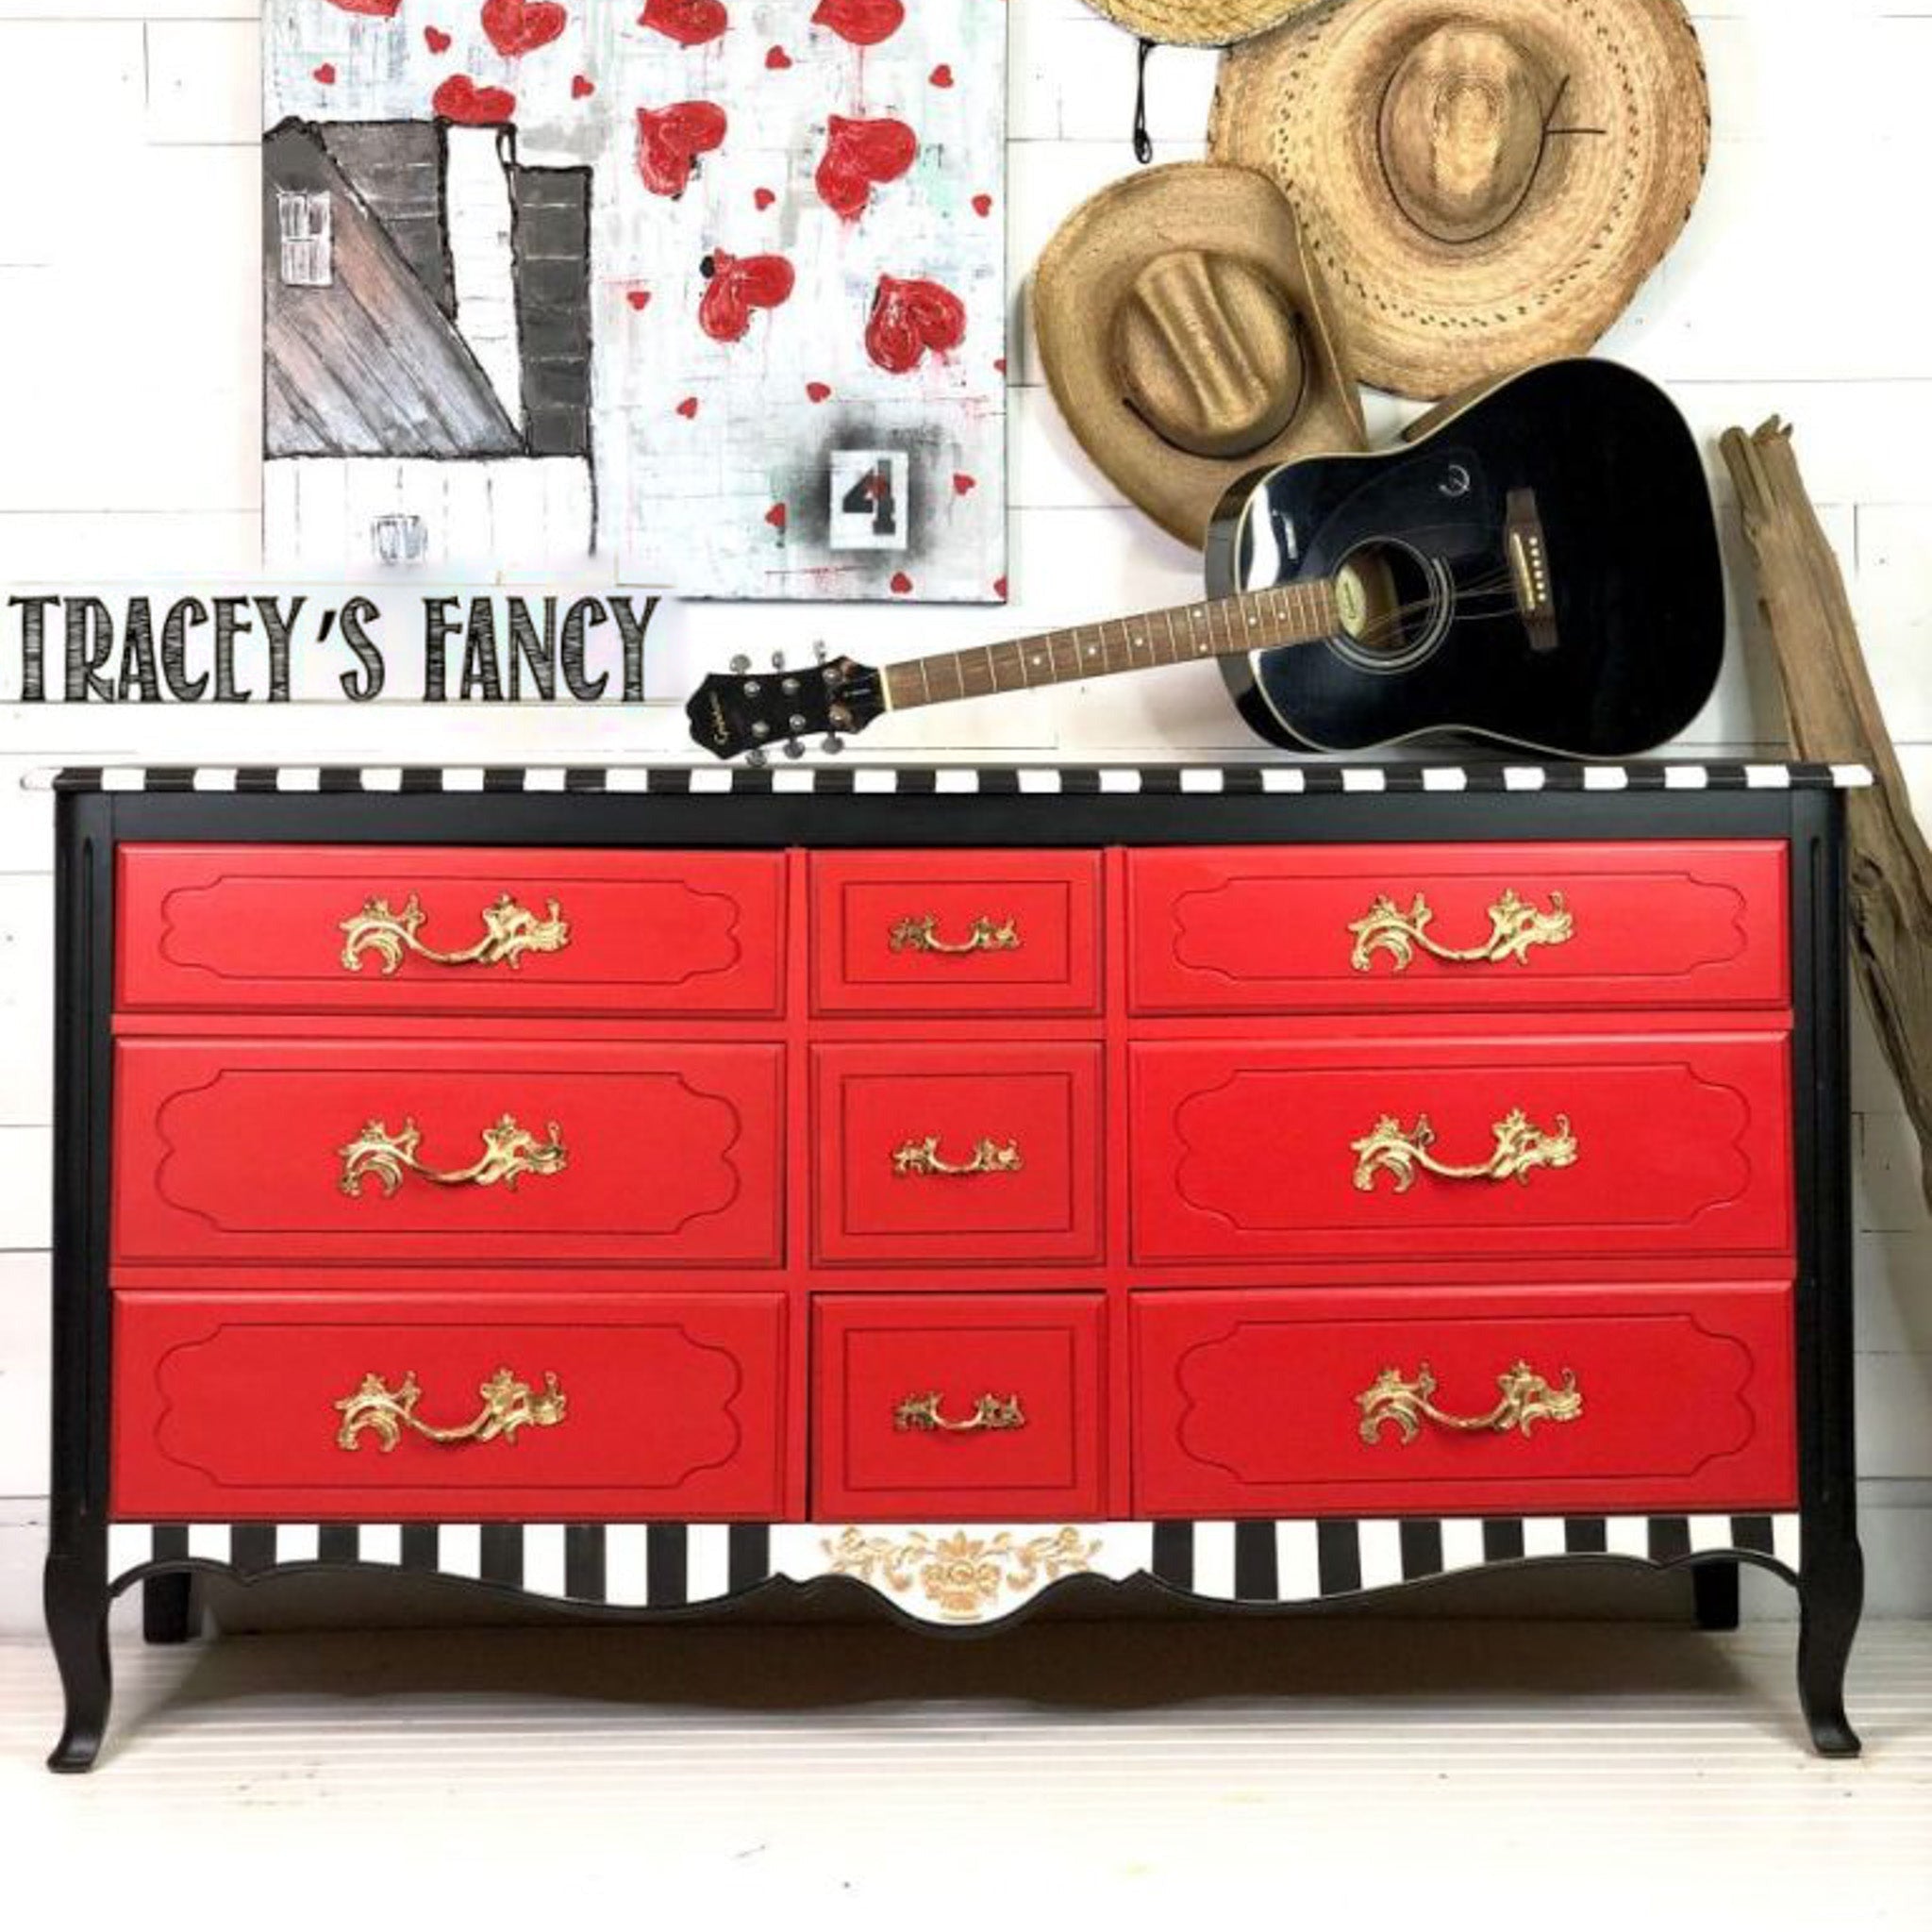 A vintage large 9-drawer dresser refurbished by Tracey's Fancy is painted black with black and white stripes and features Dixie Belle's Honky Tonk Red chalk mineral paint on its drawers.